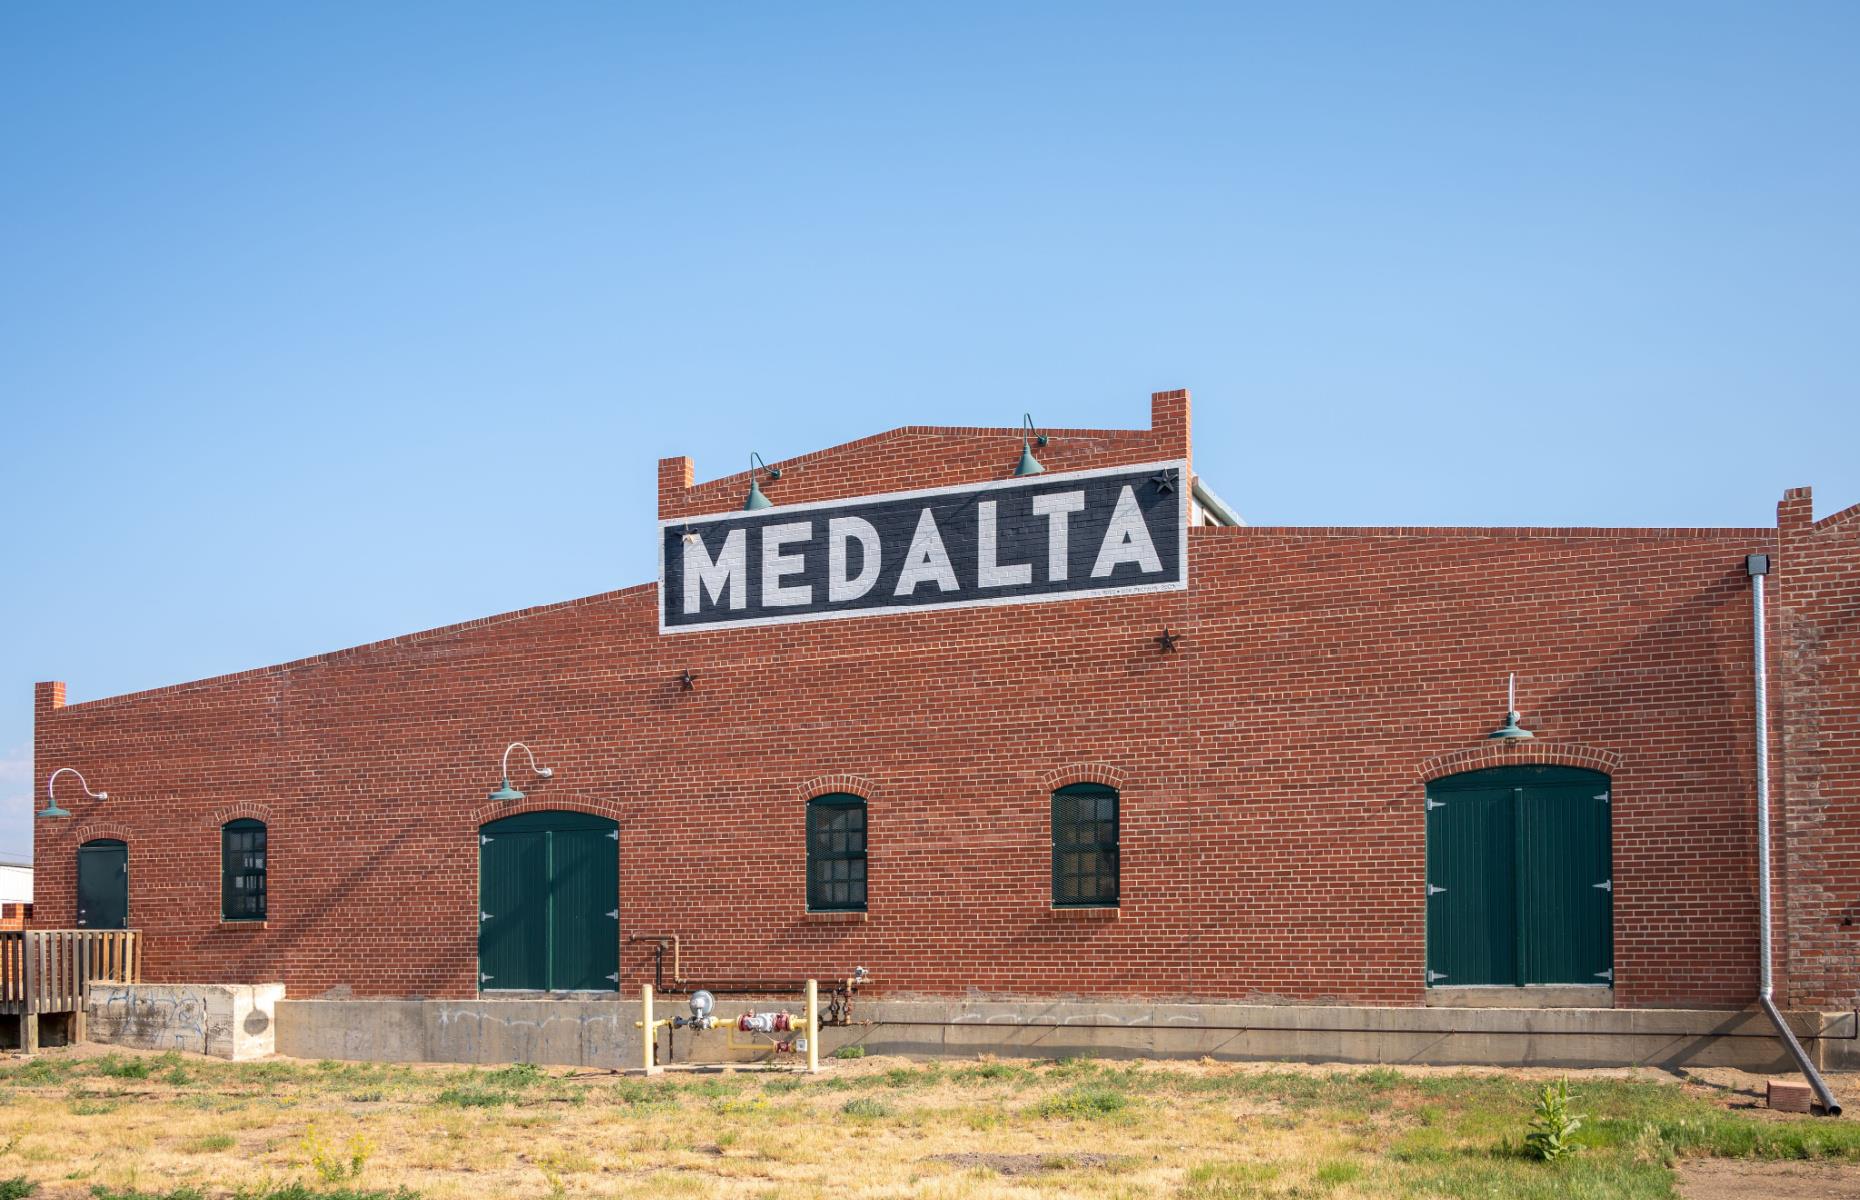 <p>The history of ceramics might not sound that exciting, but this <a href="http://medalta.org">arts hub</a> in eastern Alberta is a surprising gem. In the early 1900s the small Alberta city of Medicine Hat was a major manufacturer of pottery that was so bustling the city still has a historic clay district. The most famous of Medicine Hat’s pottery manufacturers was Medalta, the largest producer of Canadian stoneware in the early 20th Century. Today, the old Medalta plant is a historic site and museum.</p>  <p><strong><a href="https://www.loveexploring.com/galleries/87044/americas-most-beautiful-lighthouses-you-can-visit?page=1">Discover Canada's most adorable small towns and villages</a></strong></p>